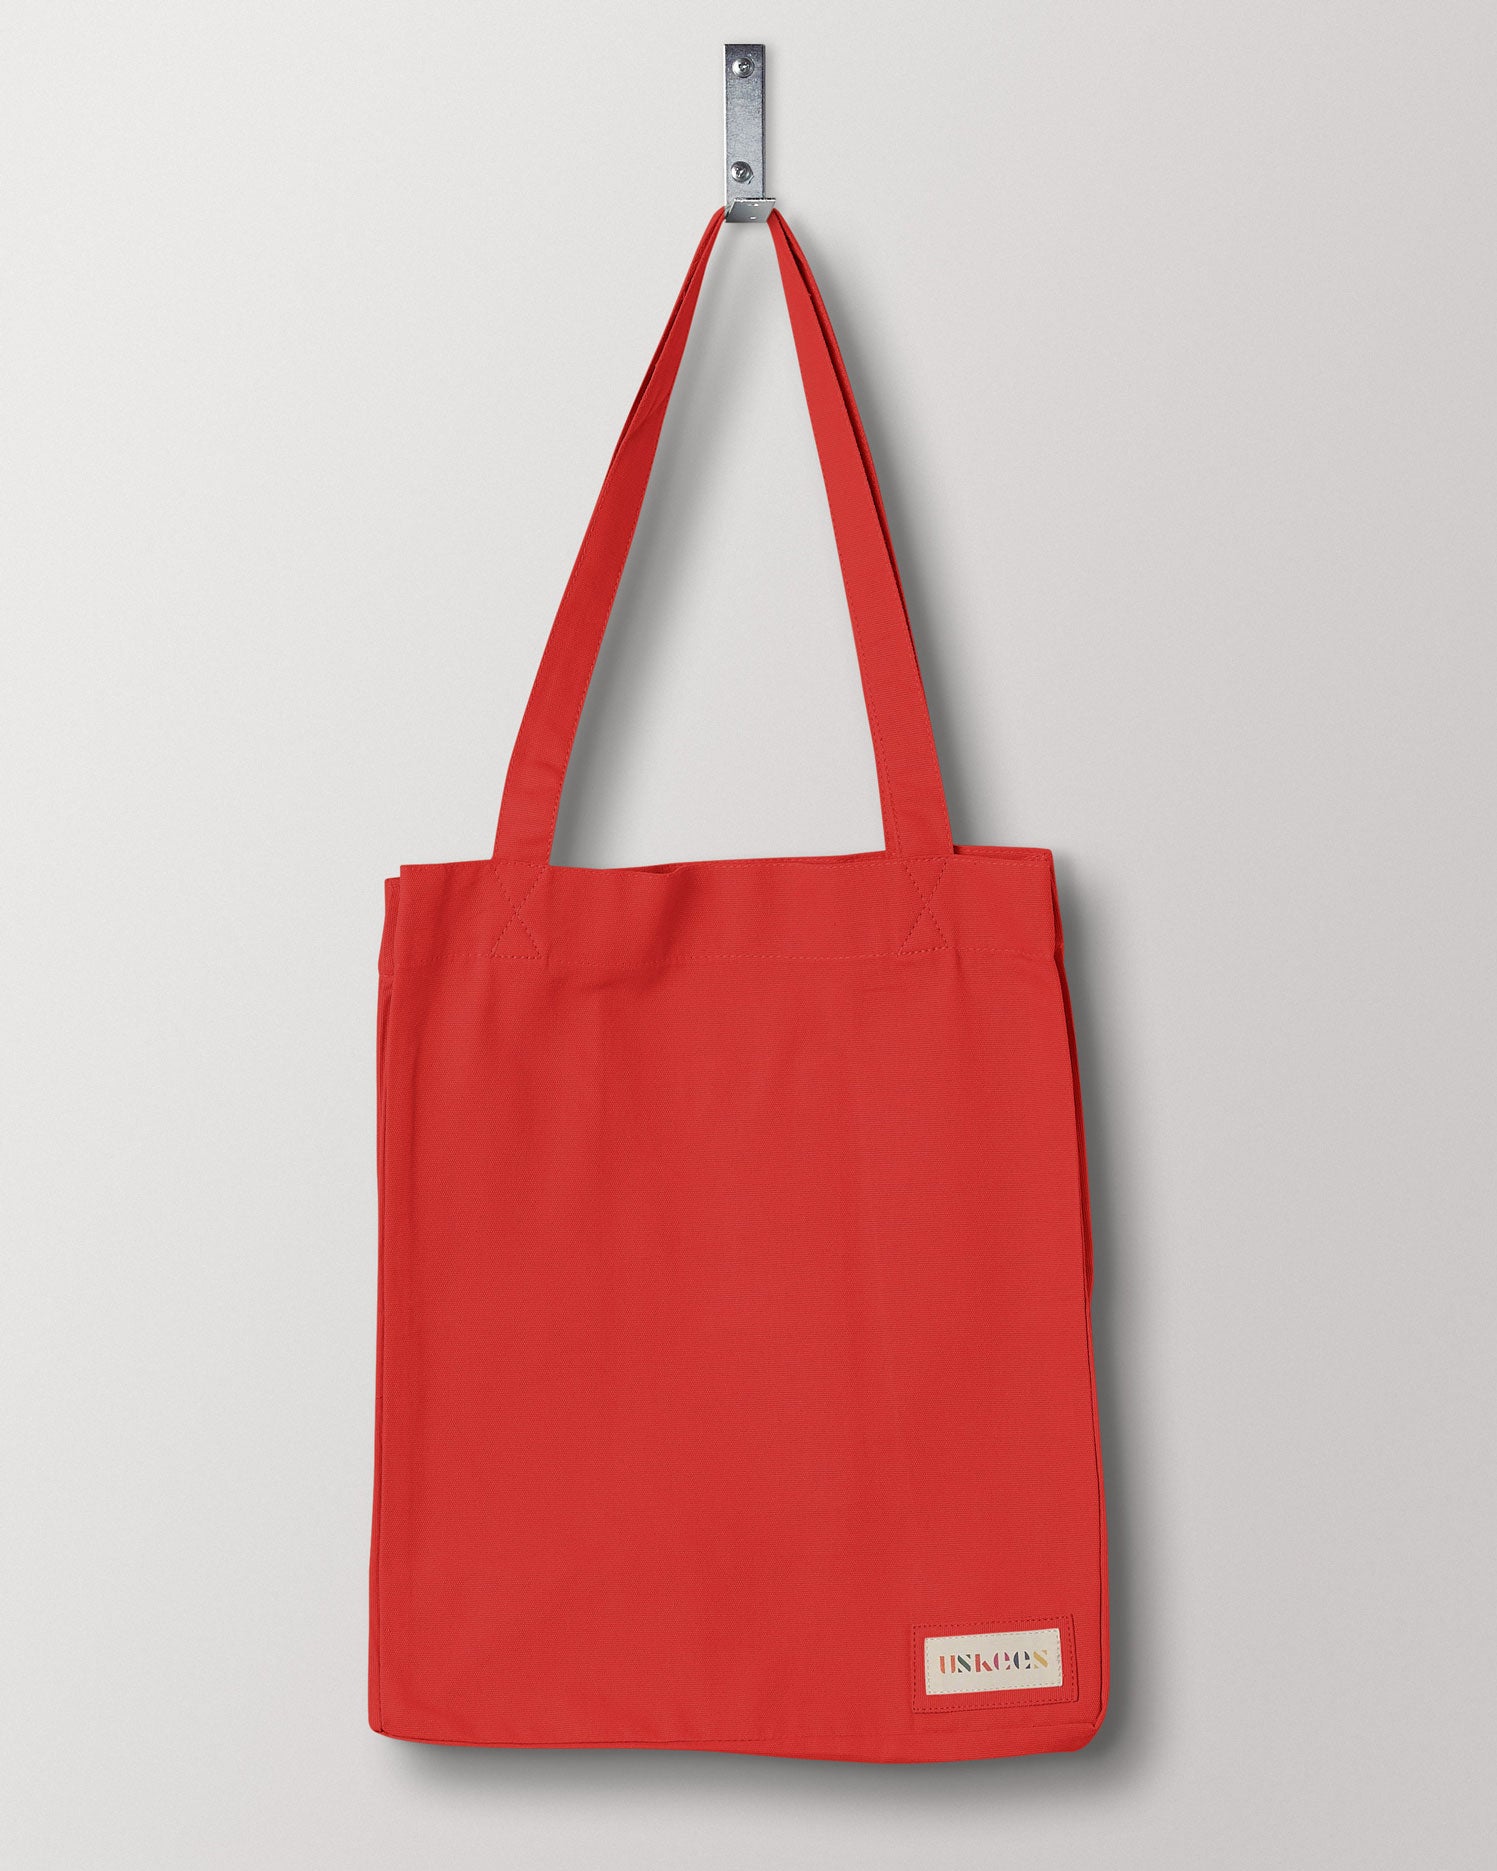 Full front hanging shot of Uskees #4002, small bright red tote bag, showing double handles and Uskees woven logo.